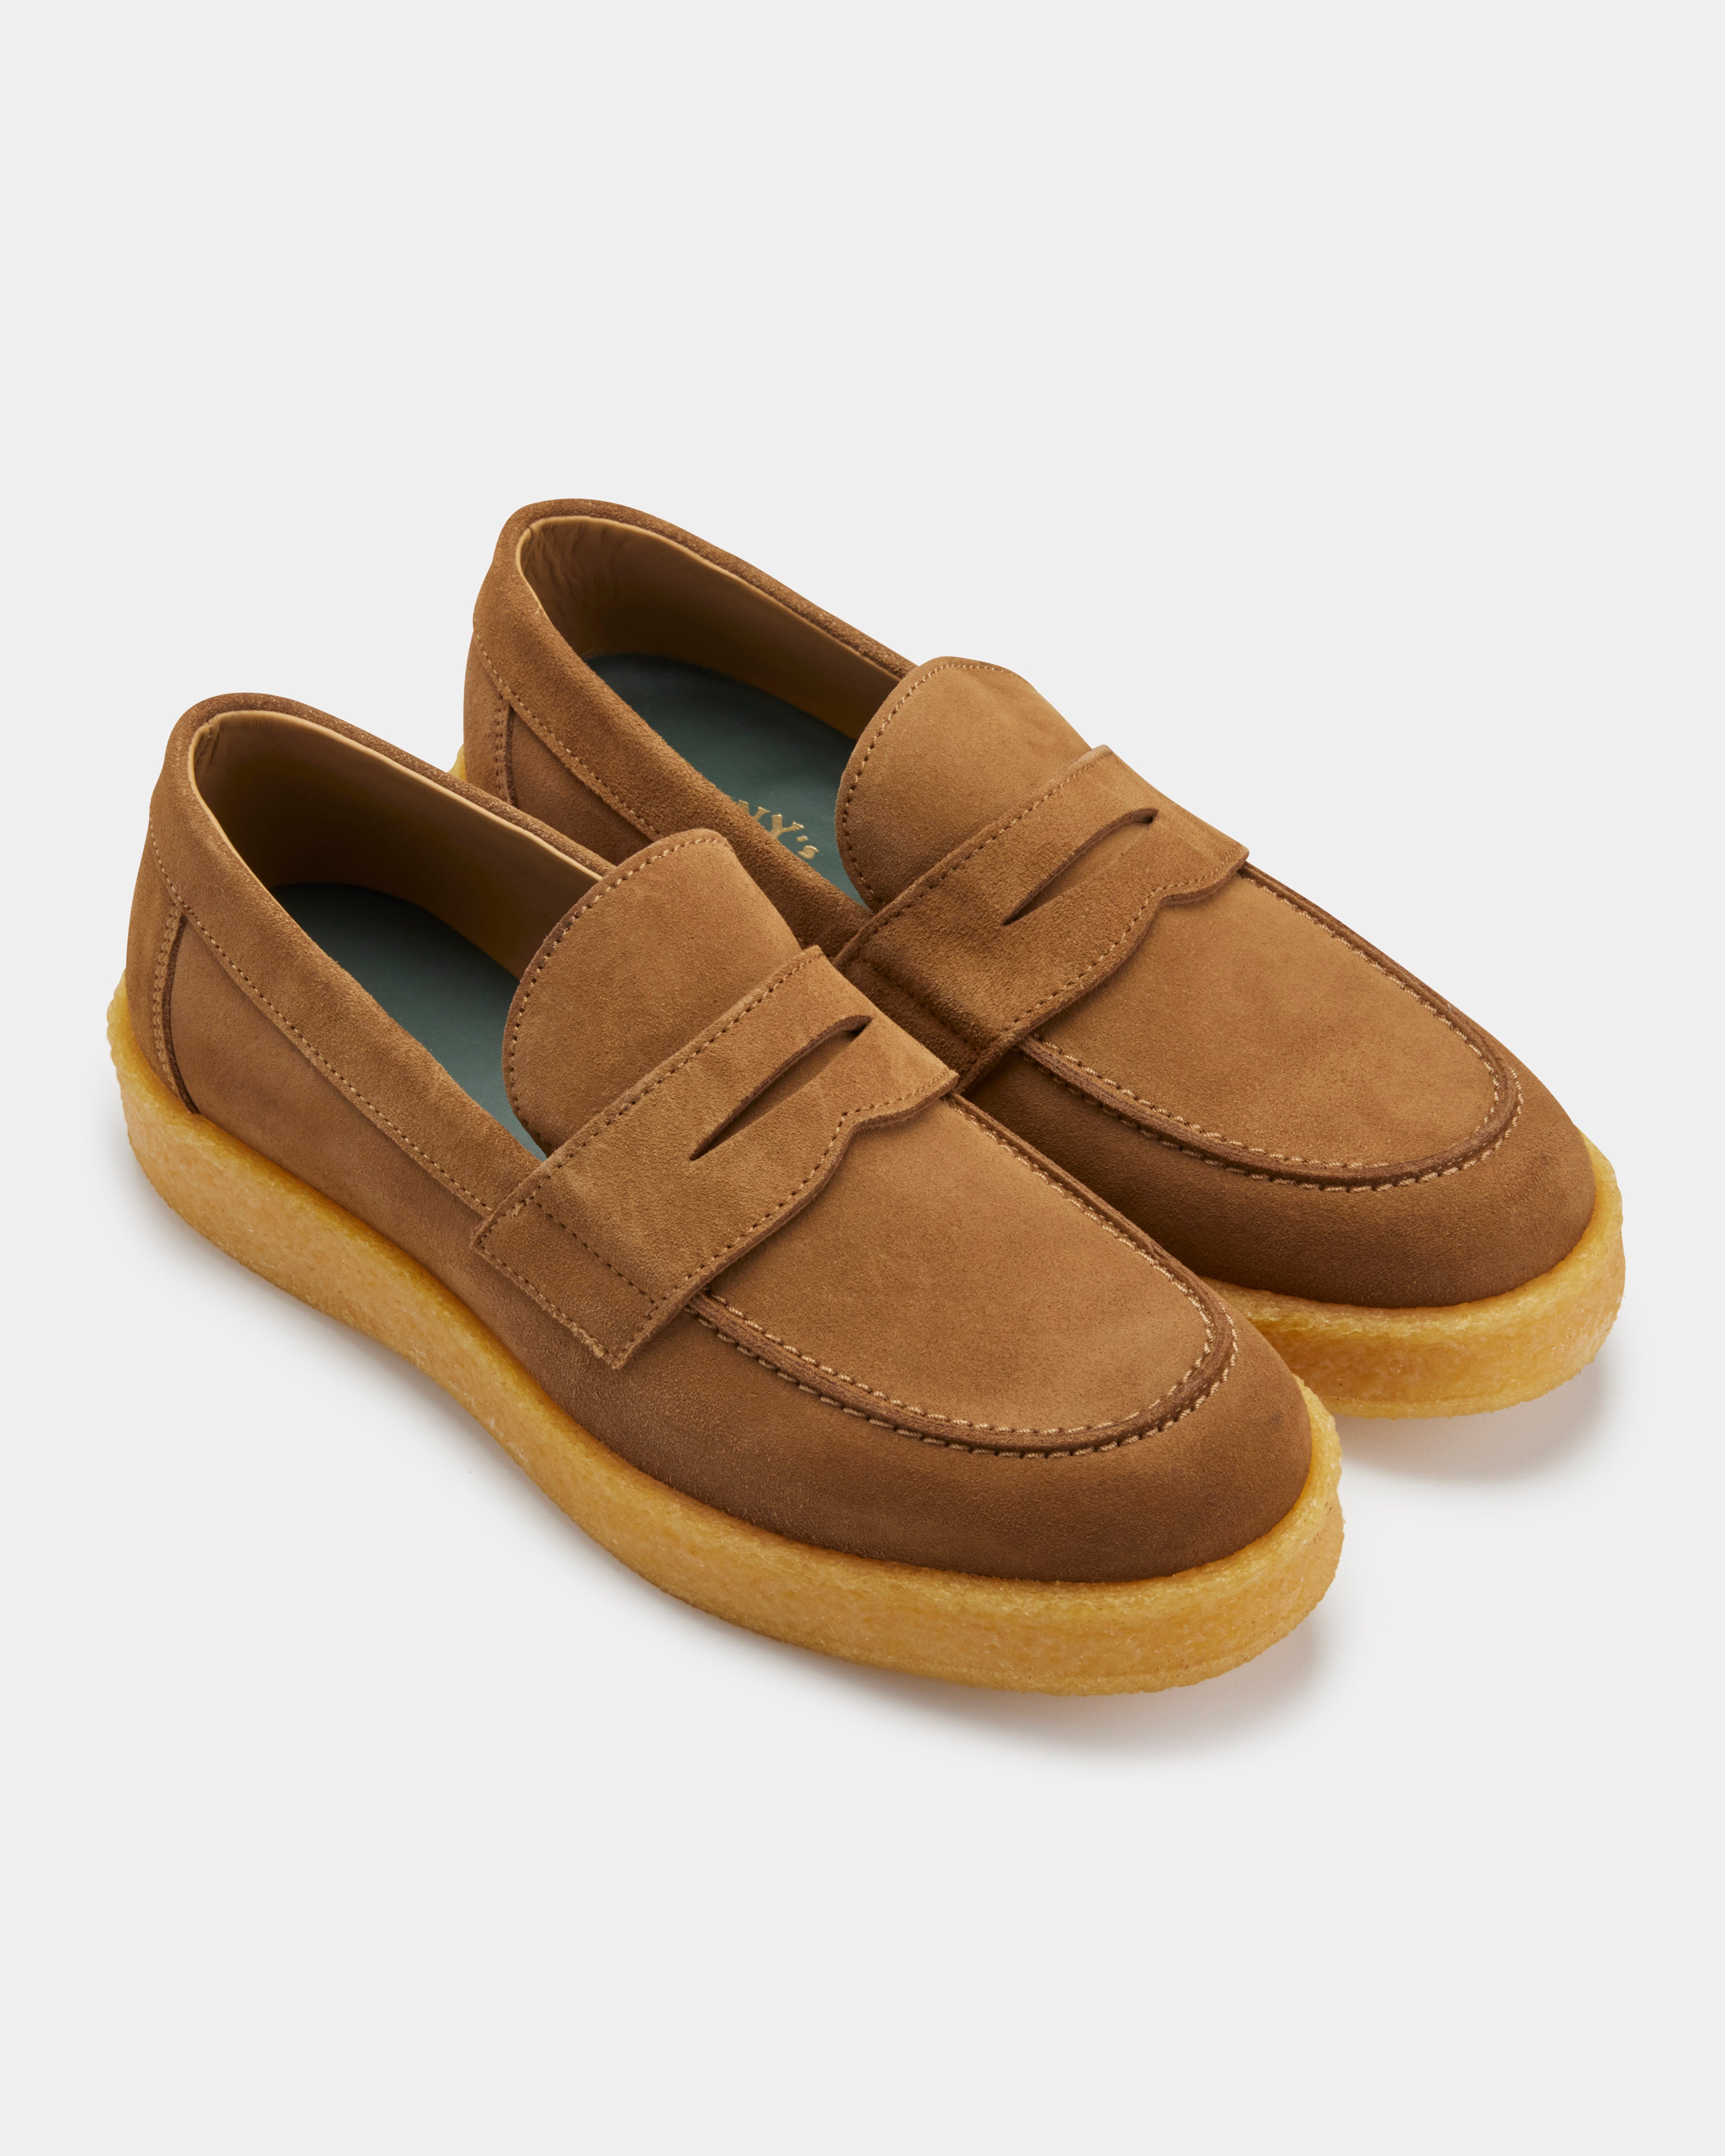 mens creeper in sand suede